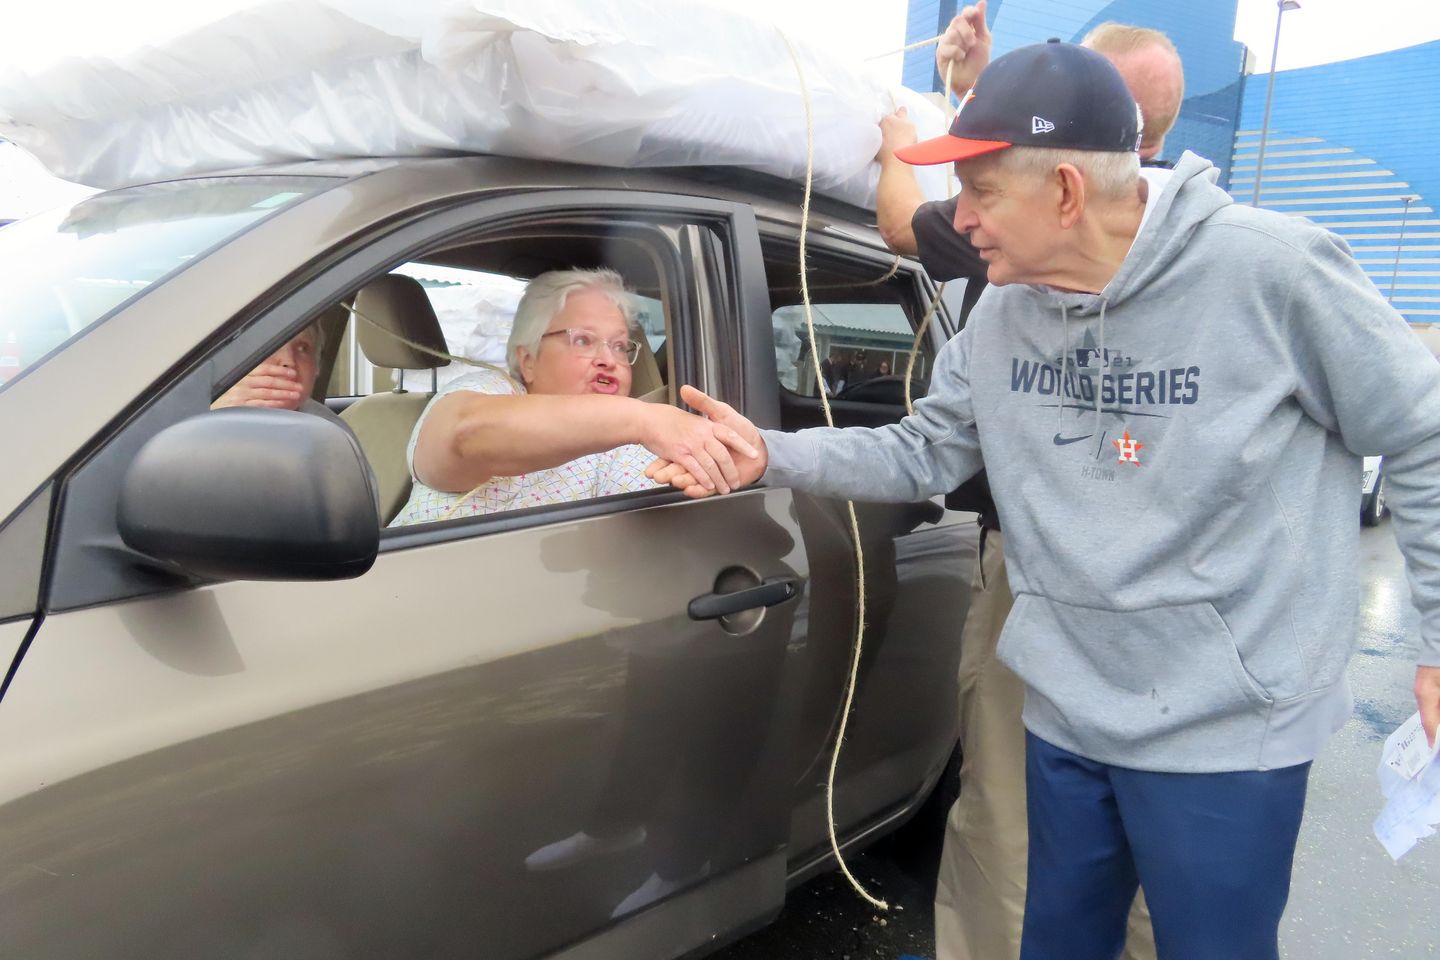 "Mattress Mack" places two million dollar wagers on Dallas Cowboys to beat San Francisco 49ers